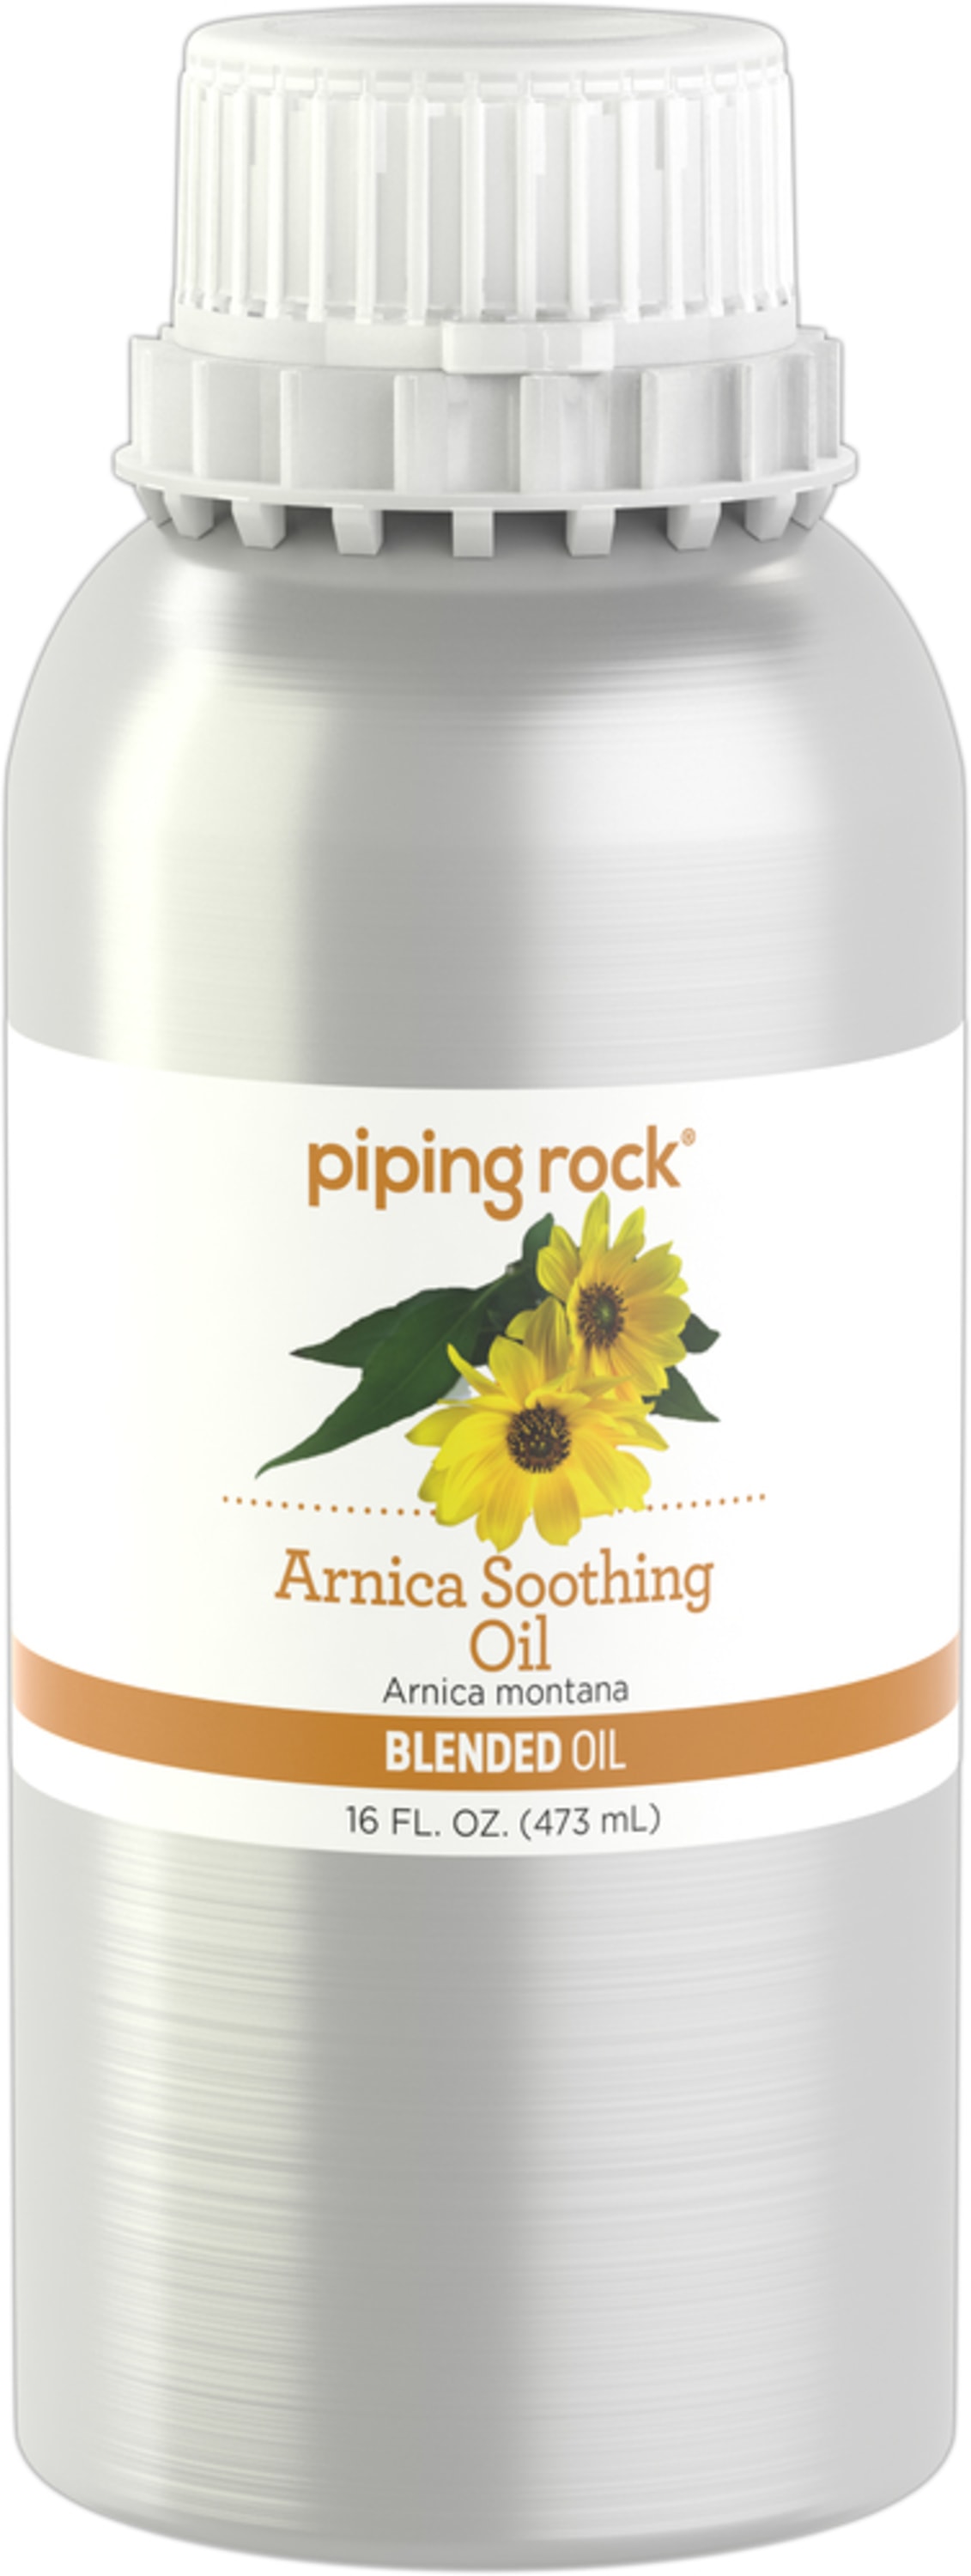 Arnica Soothing Oil Arnica Blended Oil 16 Fl Oz 473 Ml Pipingrock Health Products